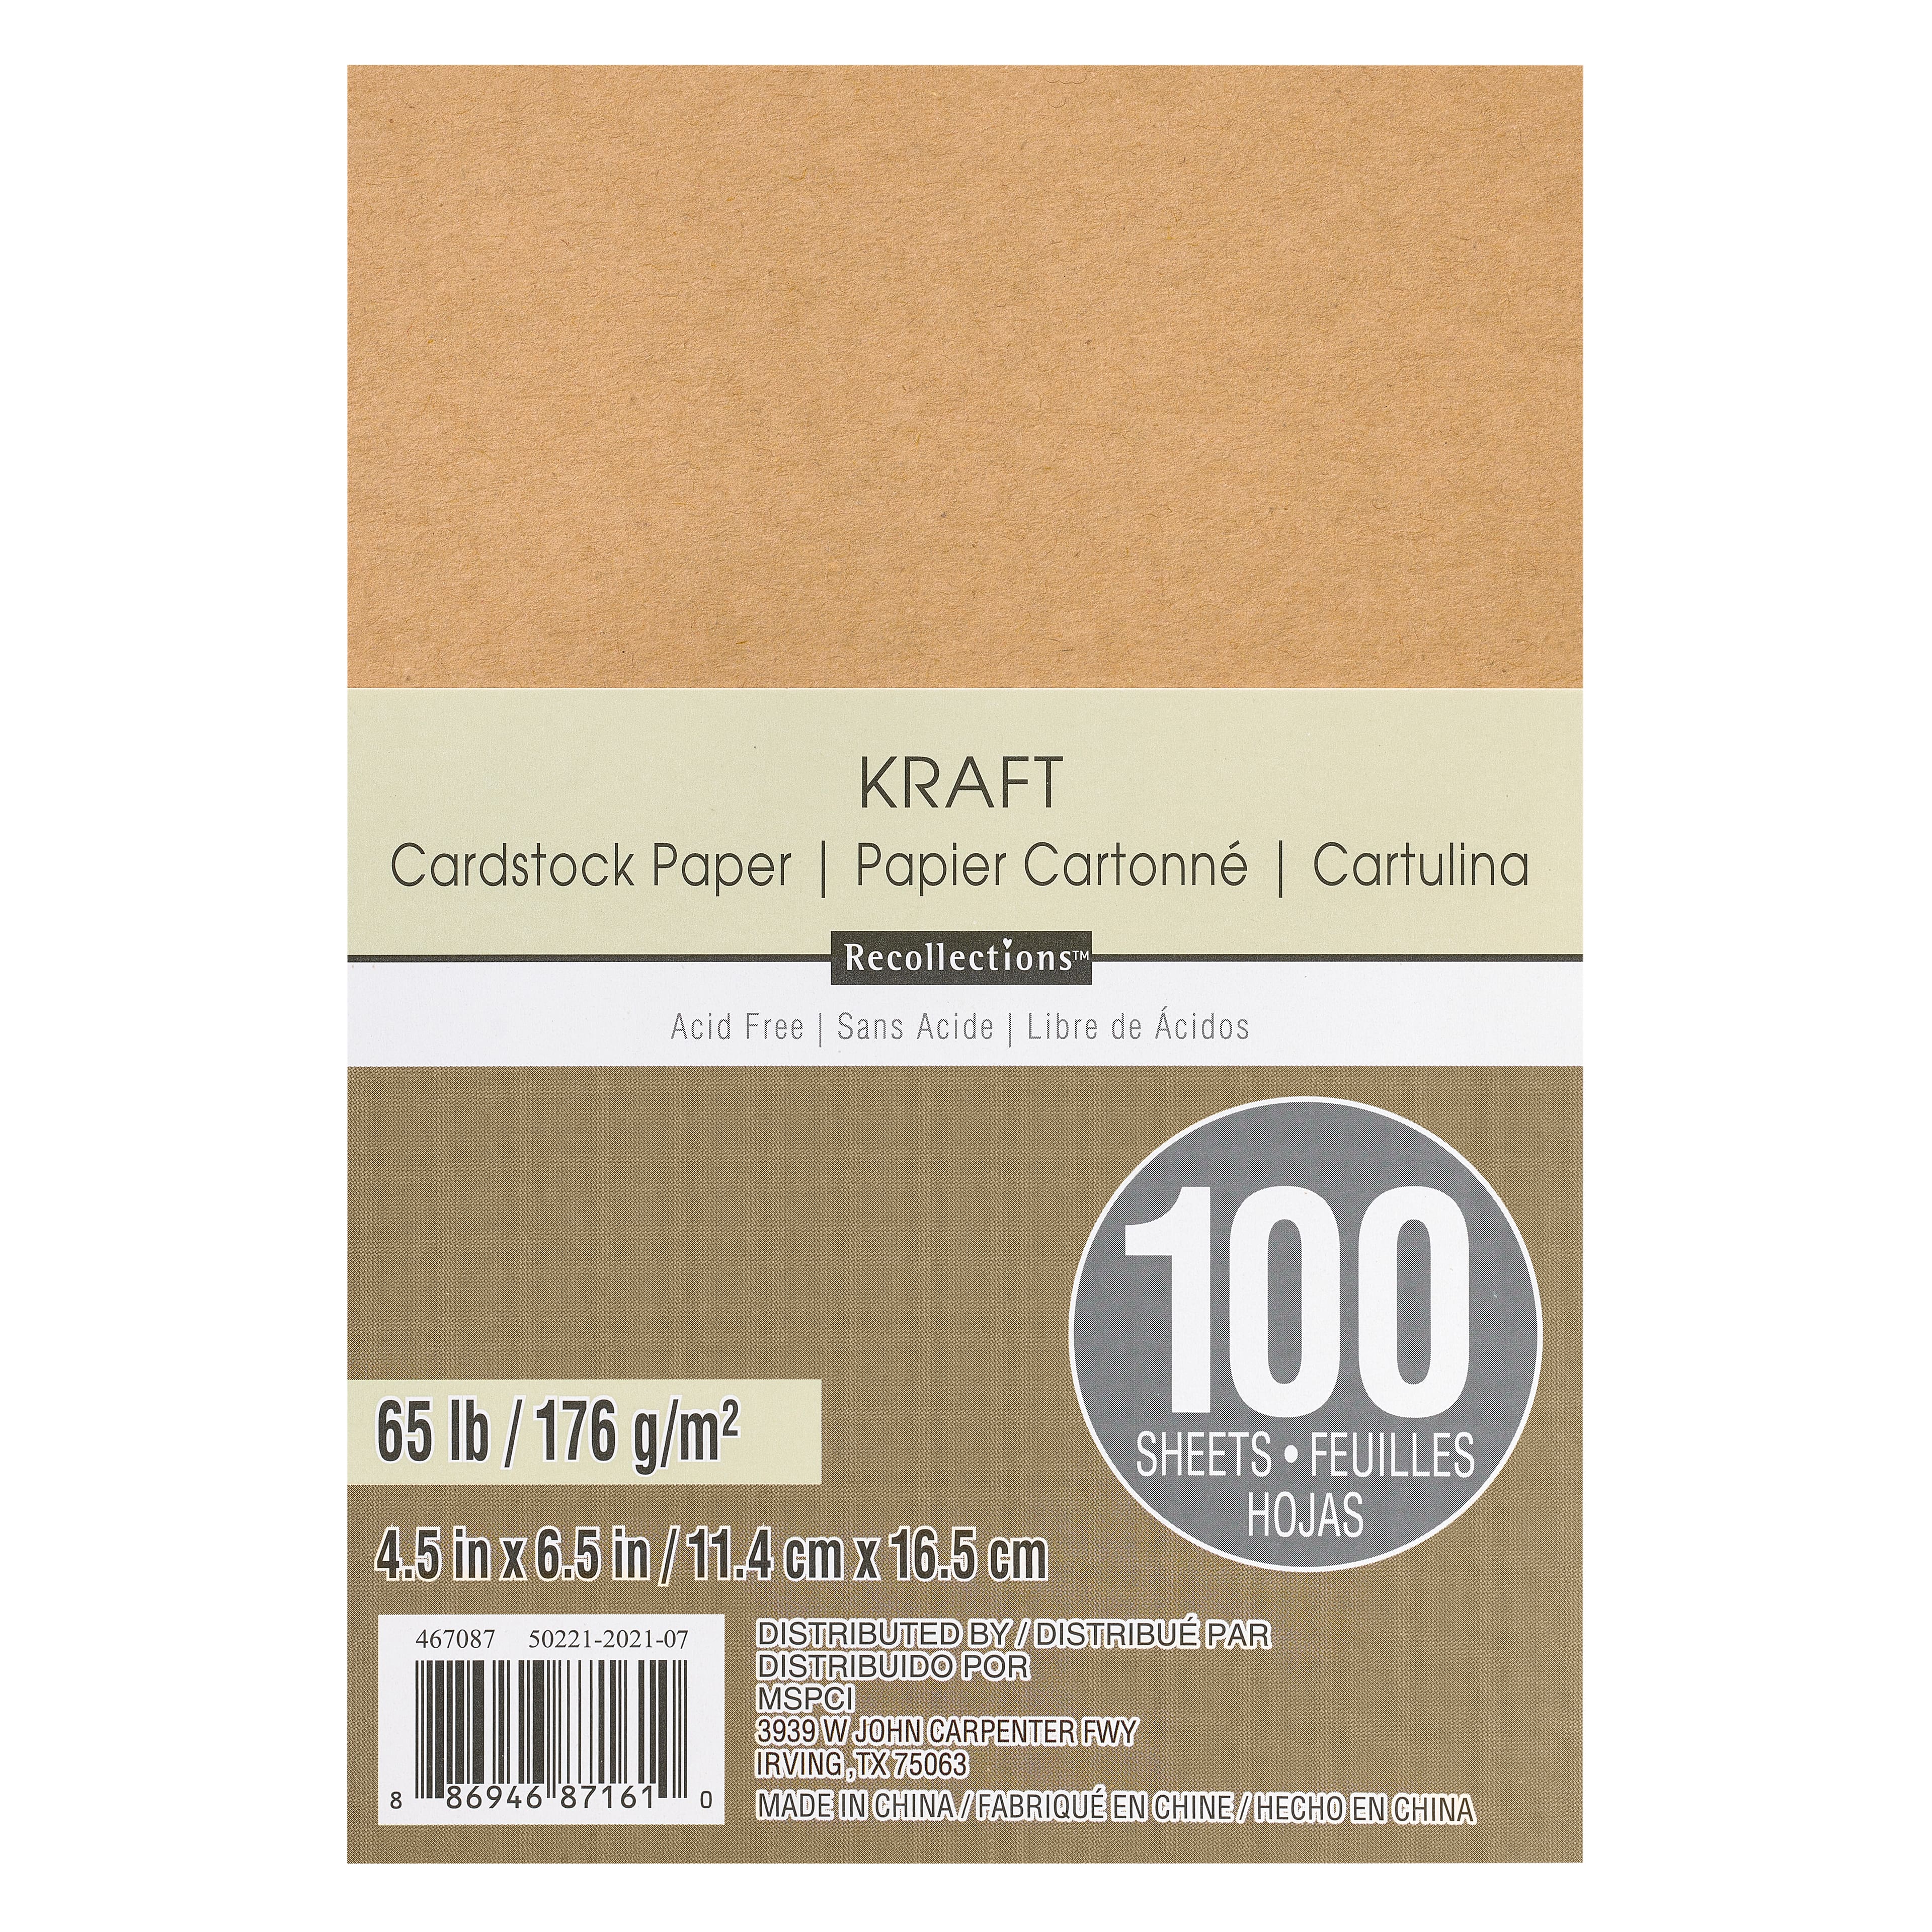 Michaels Bulk 12 Packs: 100 Ct. (1,200 Total) Primary 4.5 inch x 7 inch Cardstock Paper by Recollections, Size: 4.5 x 7, Other